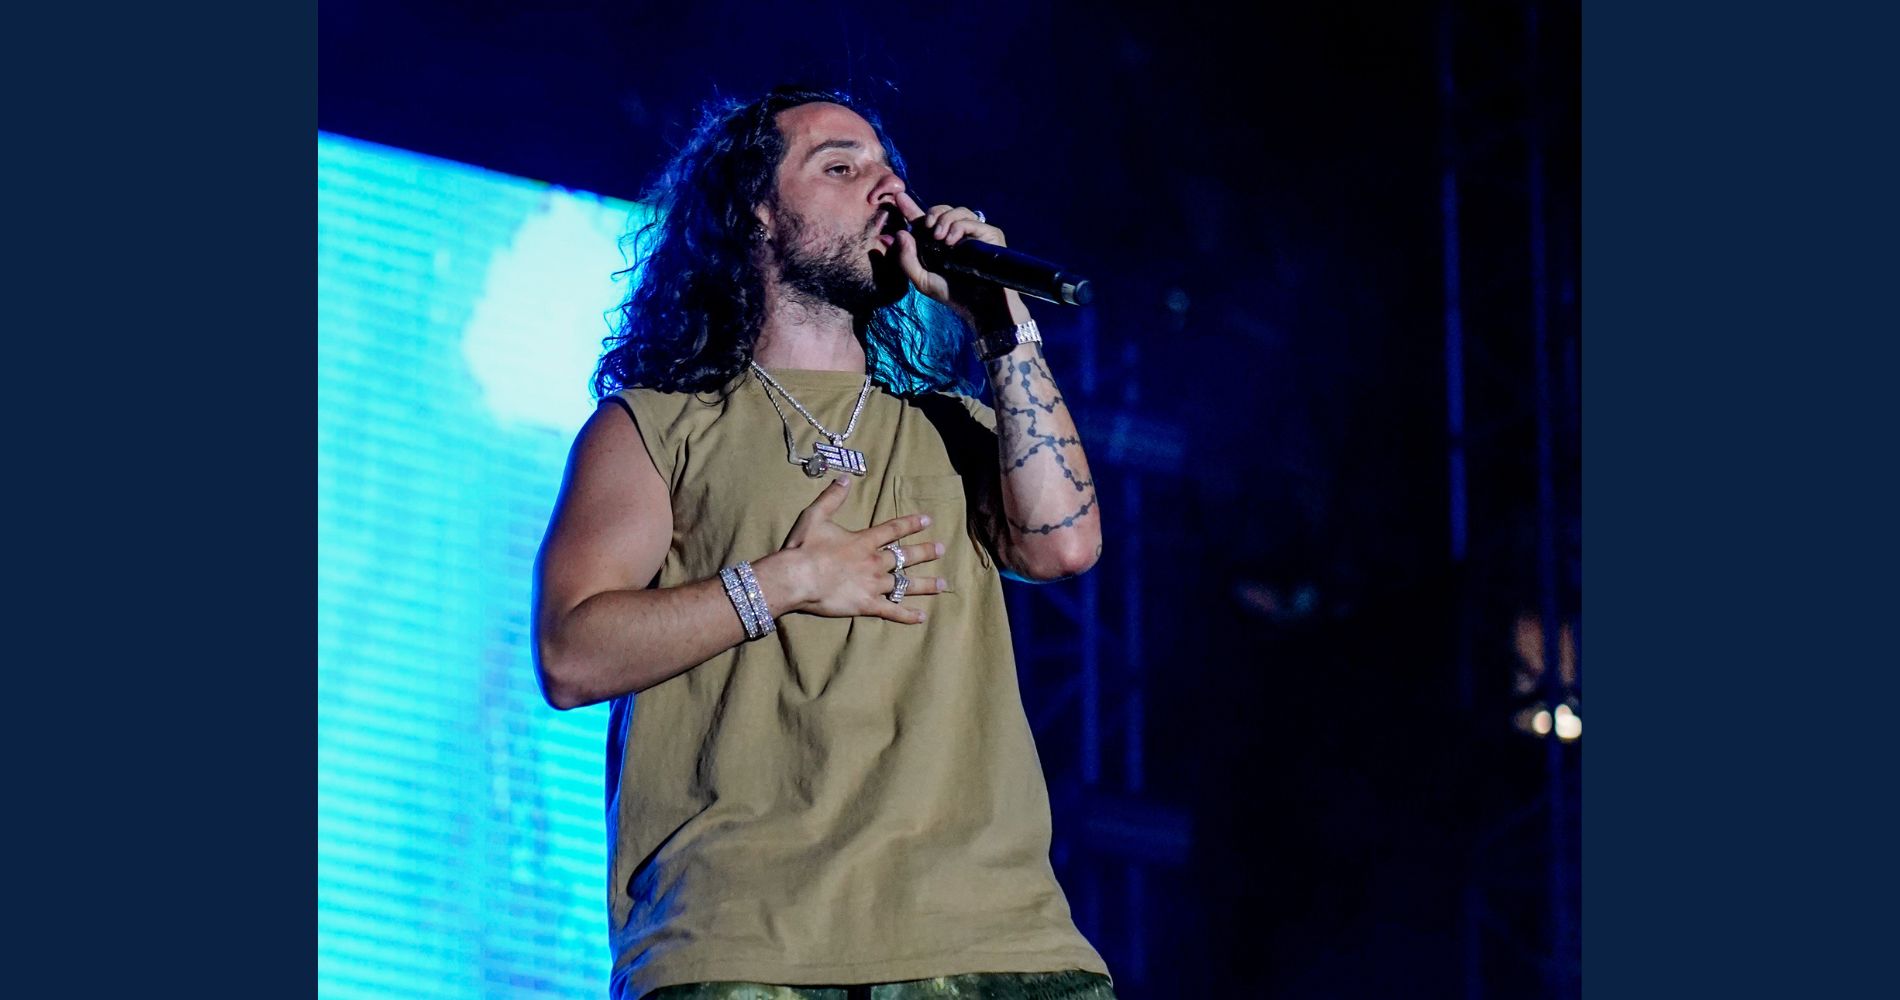 International Rapper Russ delivers a power-packed debut concert in Mumbai India